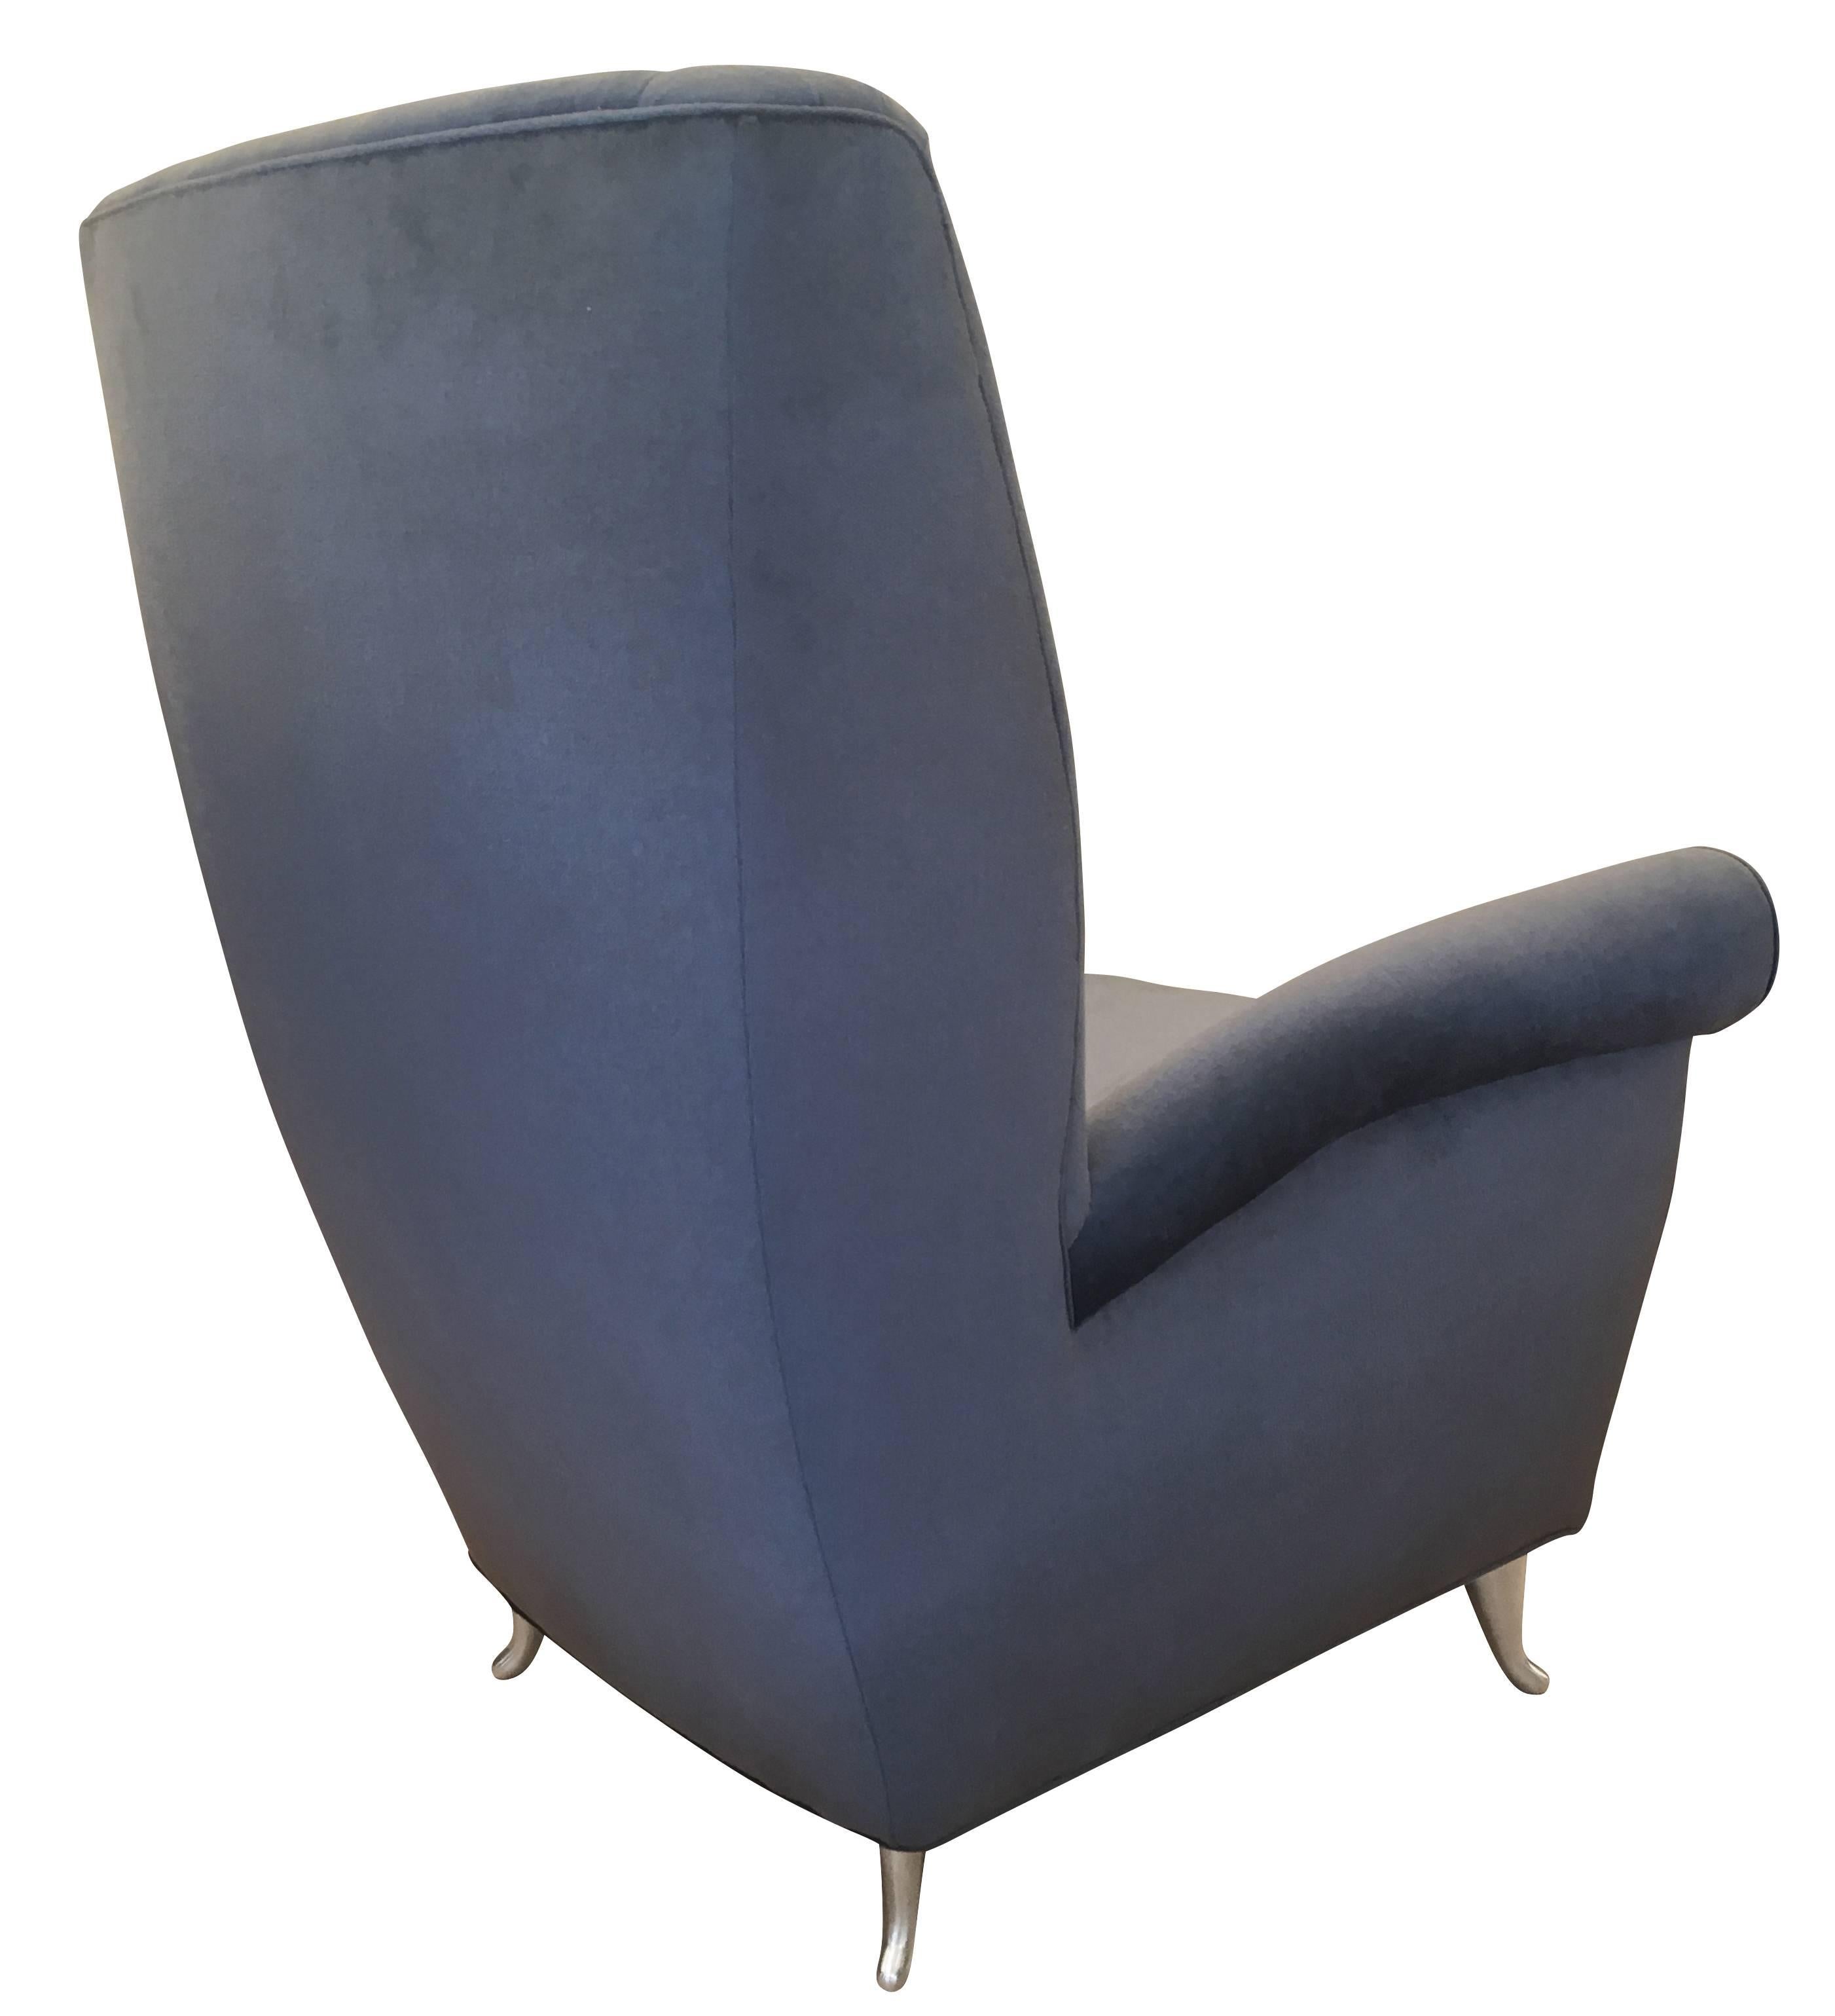 Sculptural ISA armchair at times attributed to Gio Ponti (Piasa Auction, March 2016, Lot 290). The feet are aluminum and it has been re-upholstered in a gray chenille fabric. 

Condition: Excellent vintage condition, minor wear consistent with age